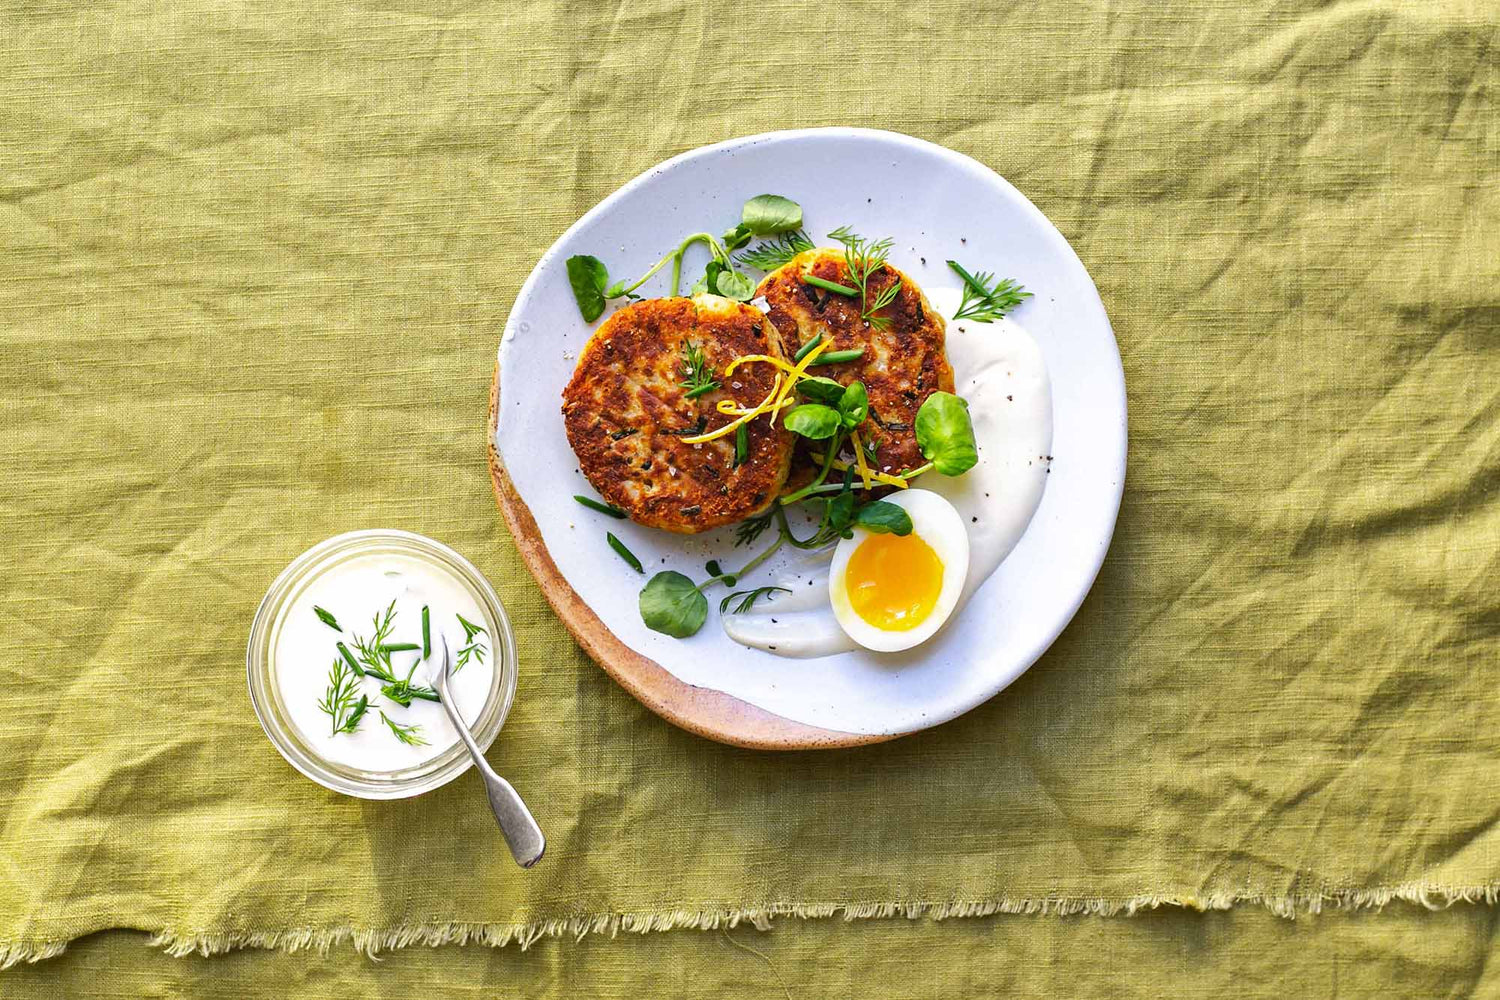 Cheese and Chive Potato Cakes